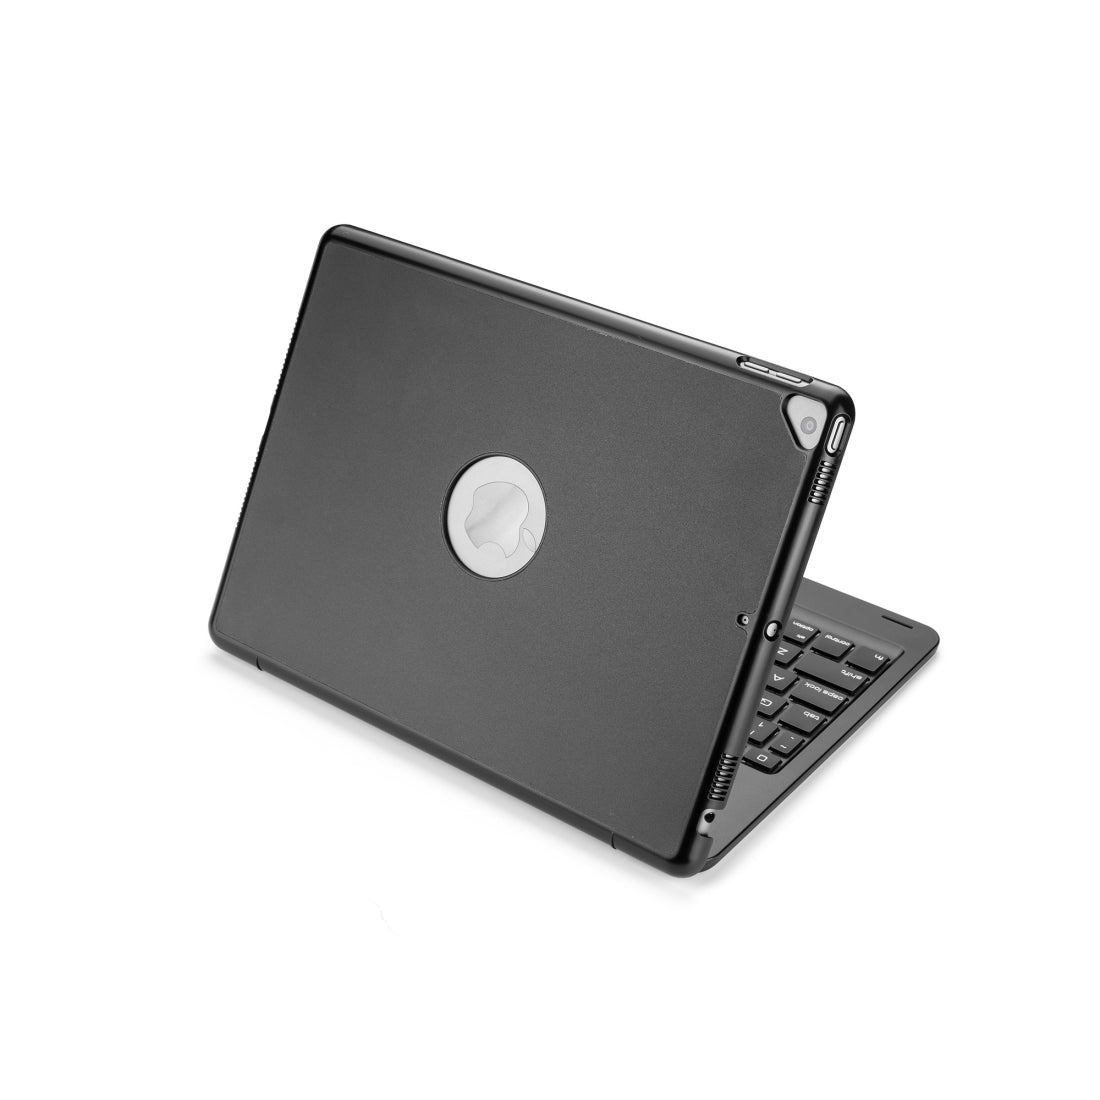 F102S For iPad 10.2 inch Aluminum Alloy Colorful Backlit Bluetooth Keyboard + Protective Case (Black)